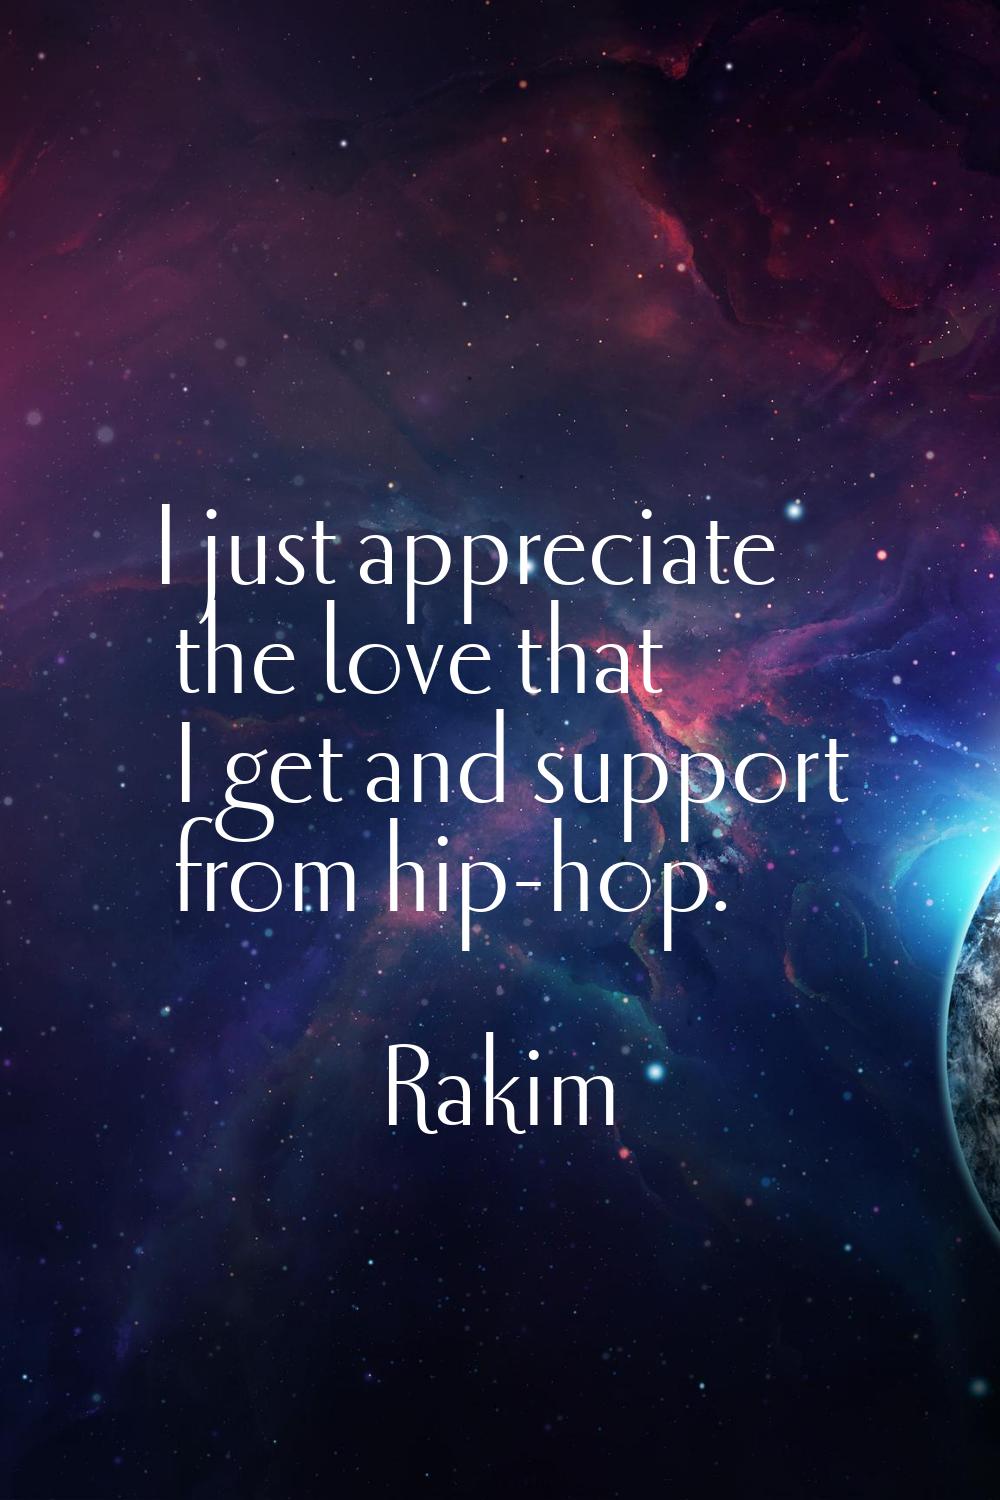 I just appreciate the love that I get and support from hip-hop.